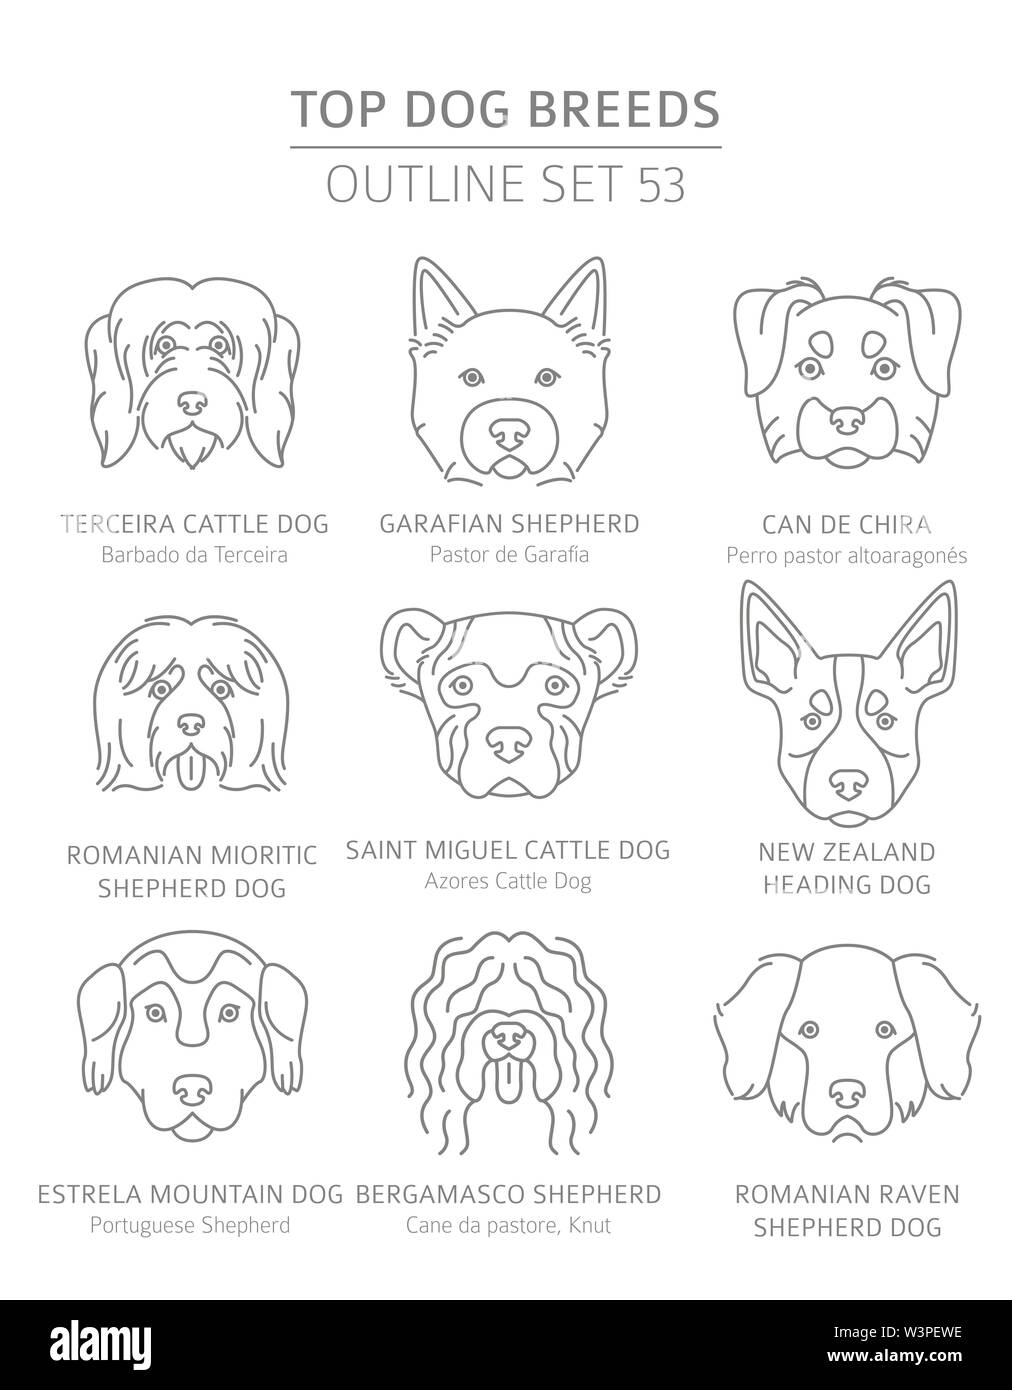 Top dog breeds. Hunting, shepherd and companion dogs set. Pet outline collection. Vector illustration Stock Vector